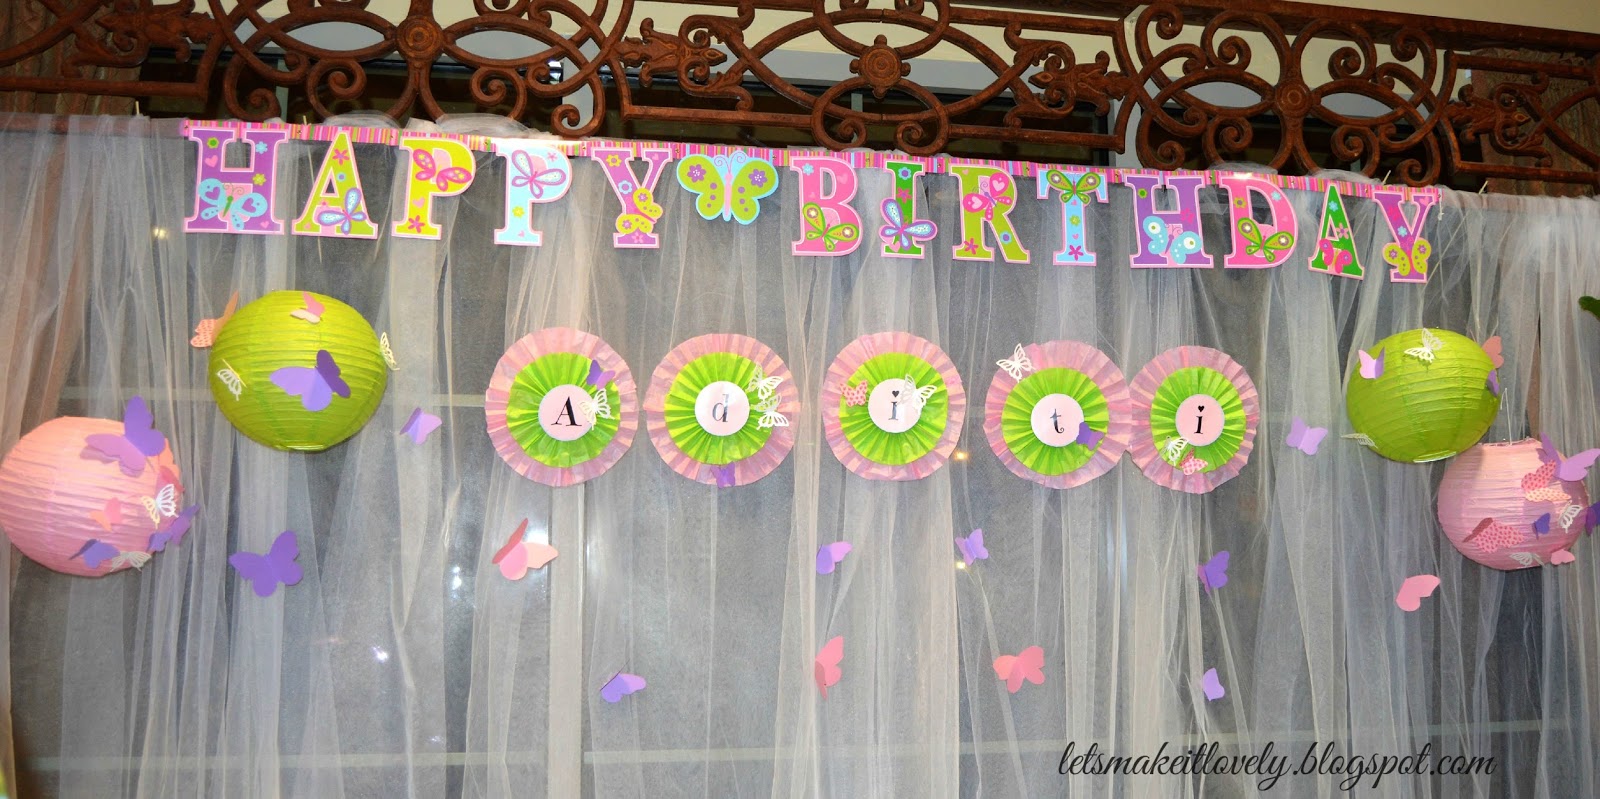 Let's make it lovely: DIY Butterfly Themed Birthday Party